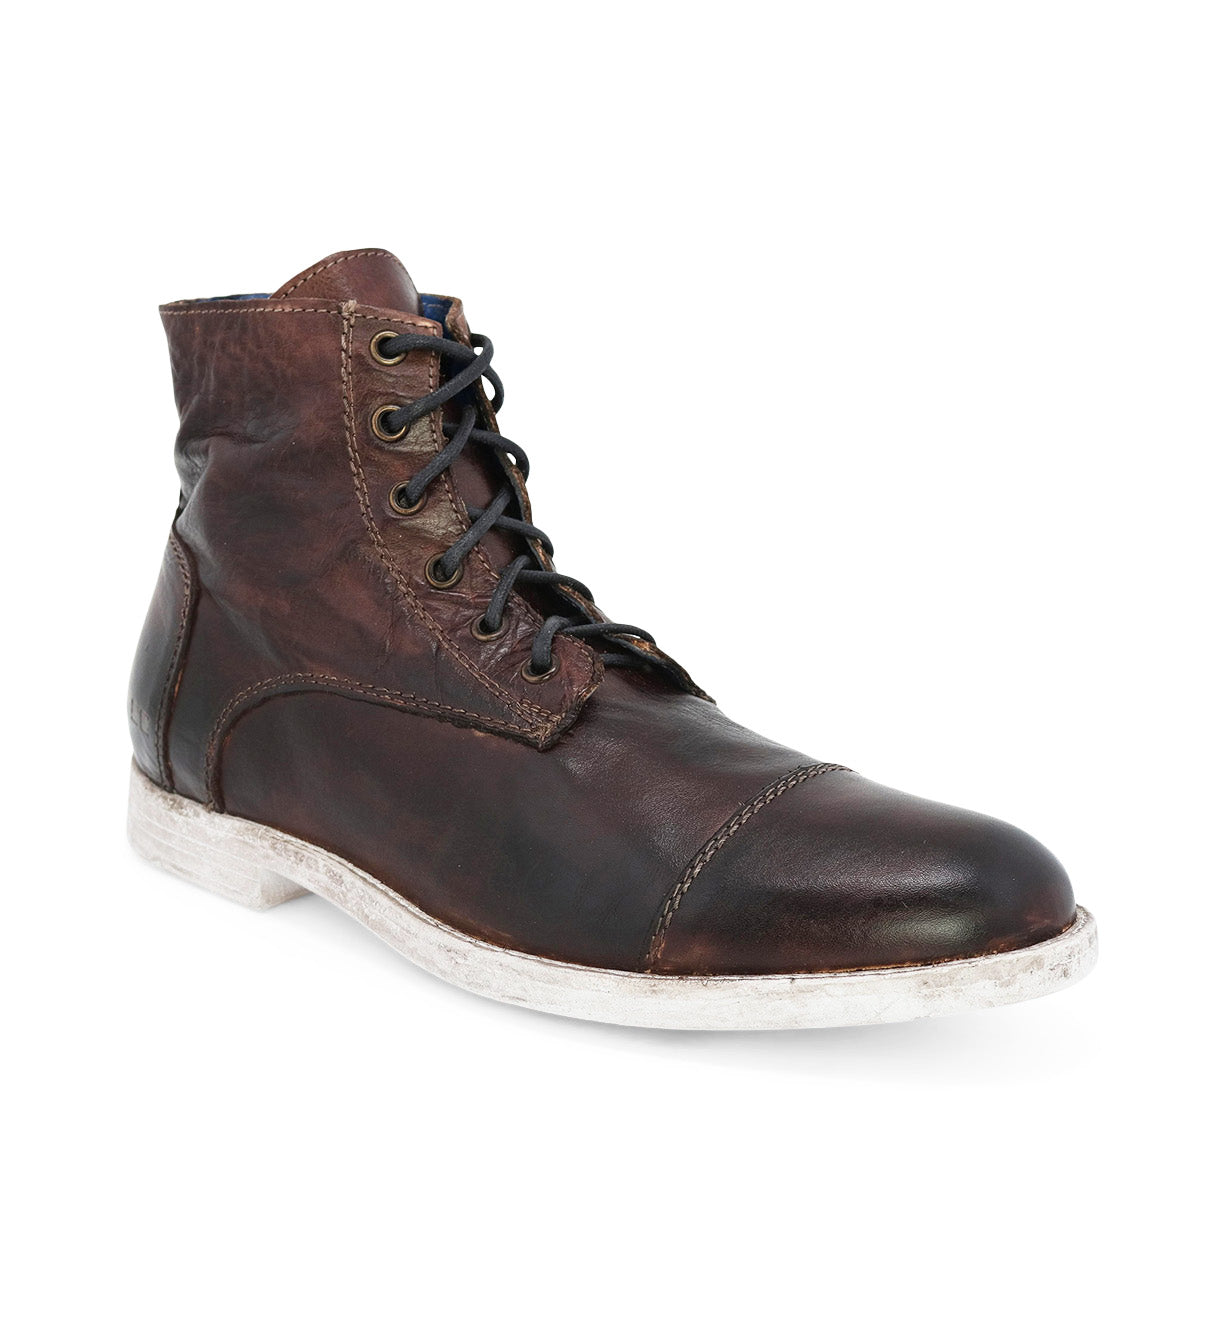 A men's brown leather Leonardo boot with laces from Bed Stu.